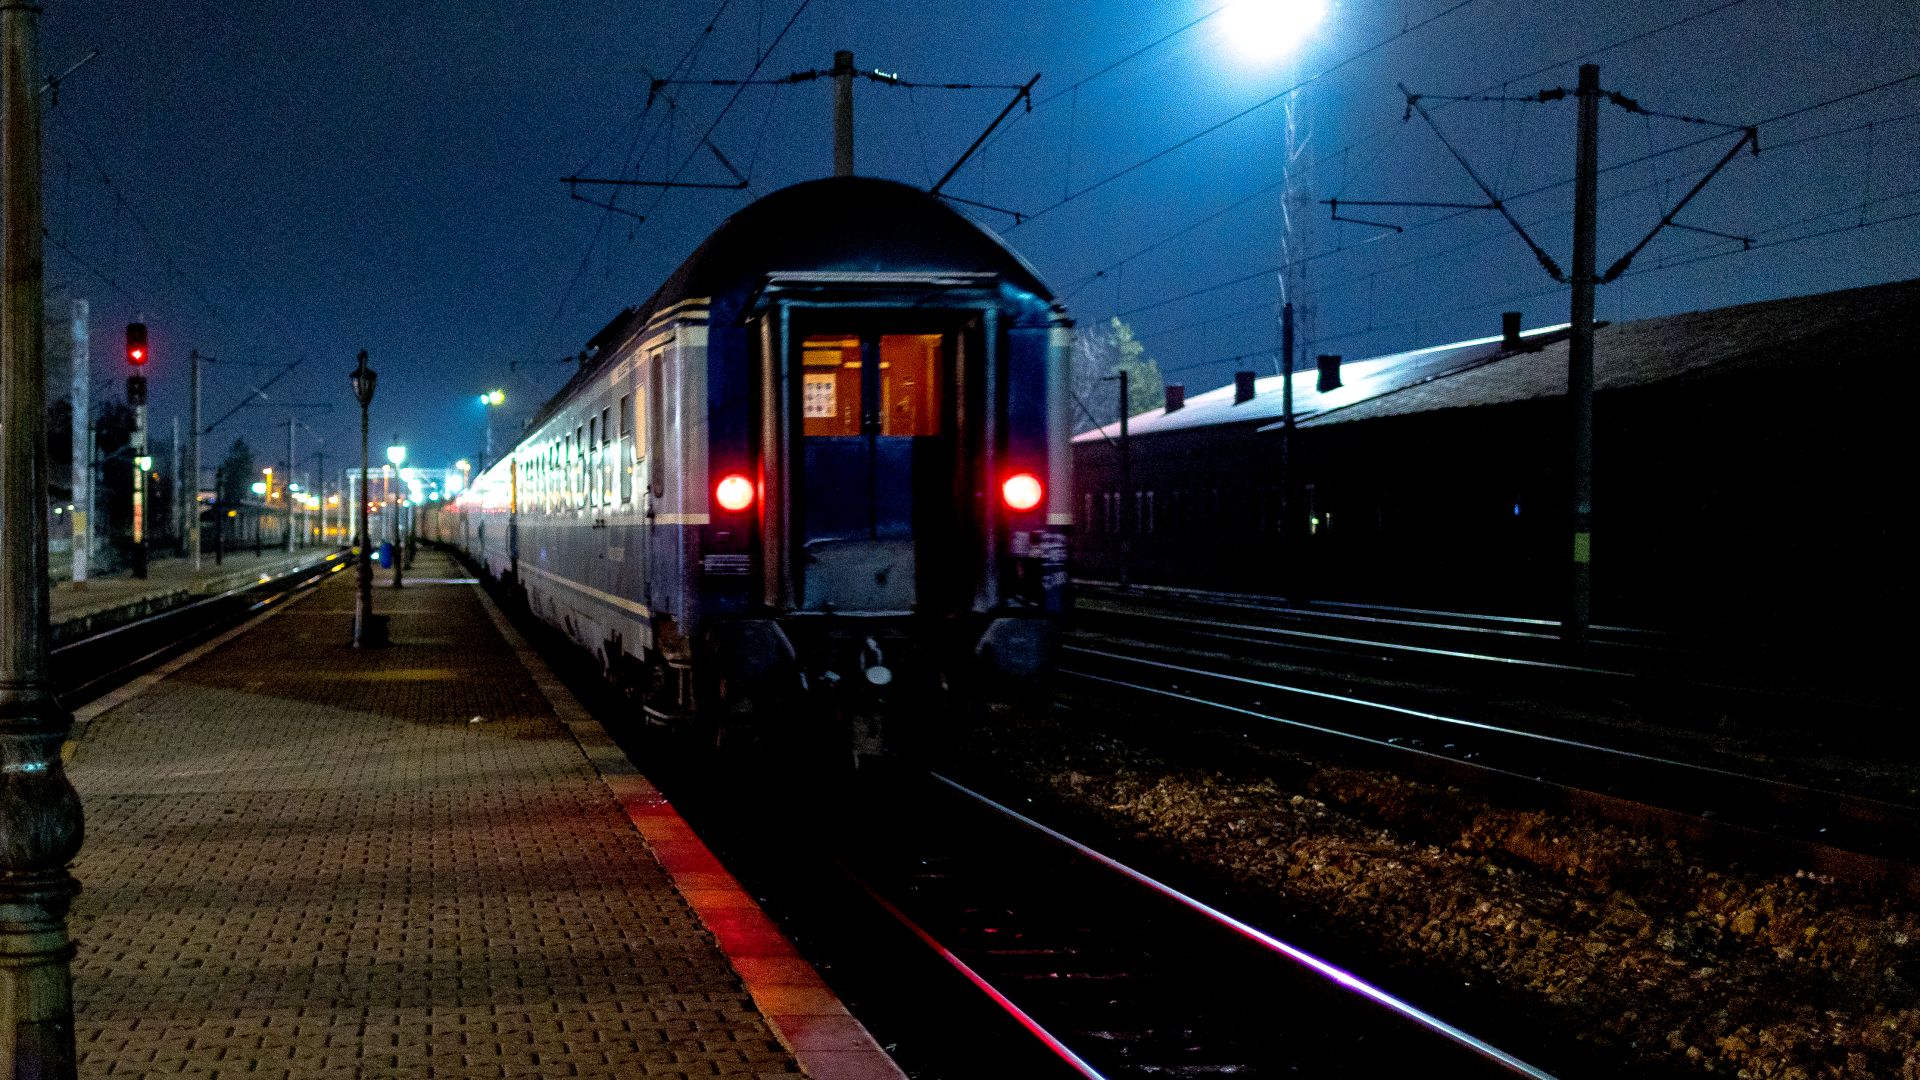 A train pulling in to a platform